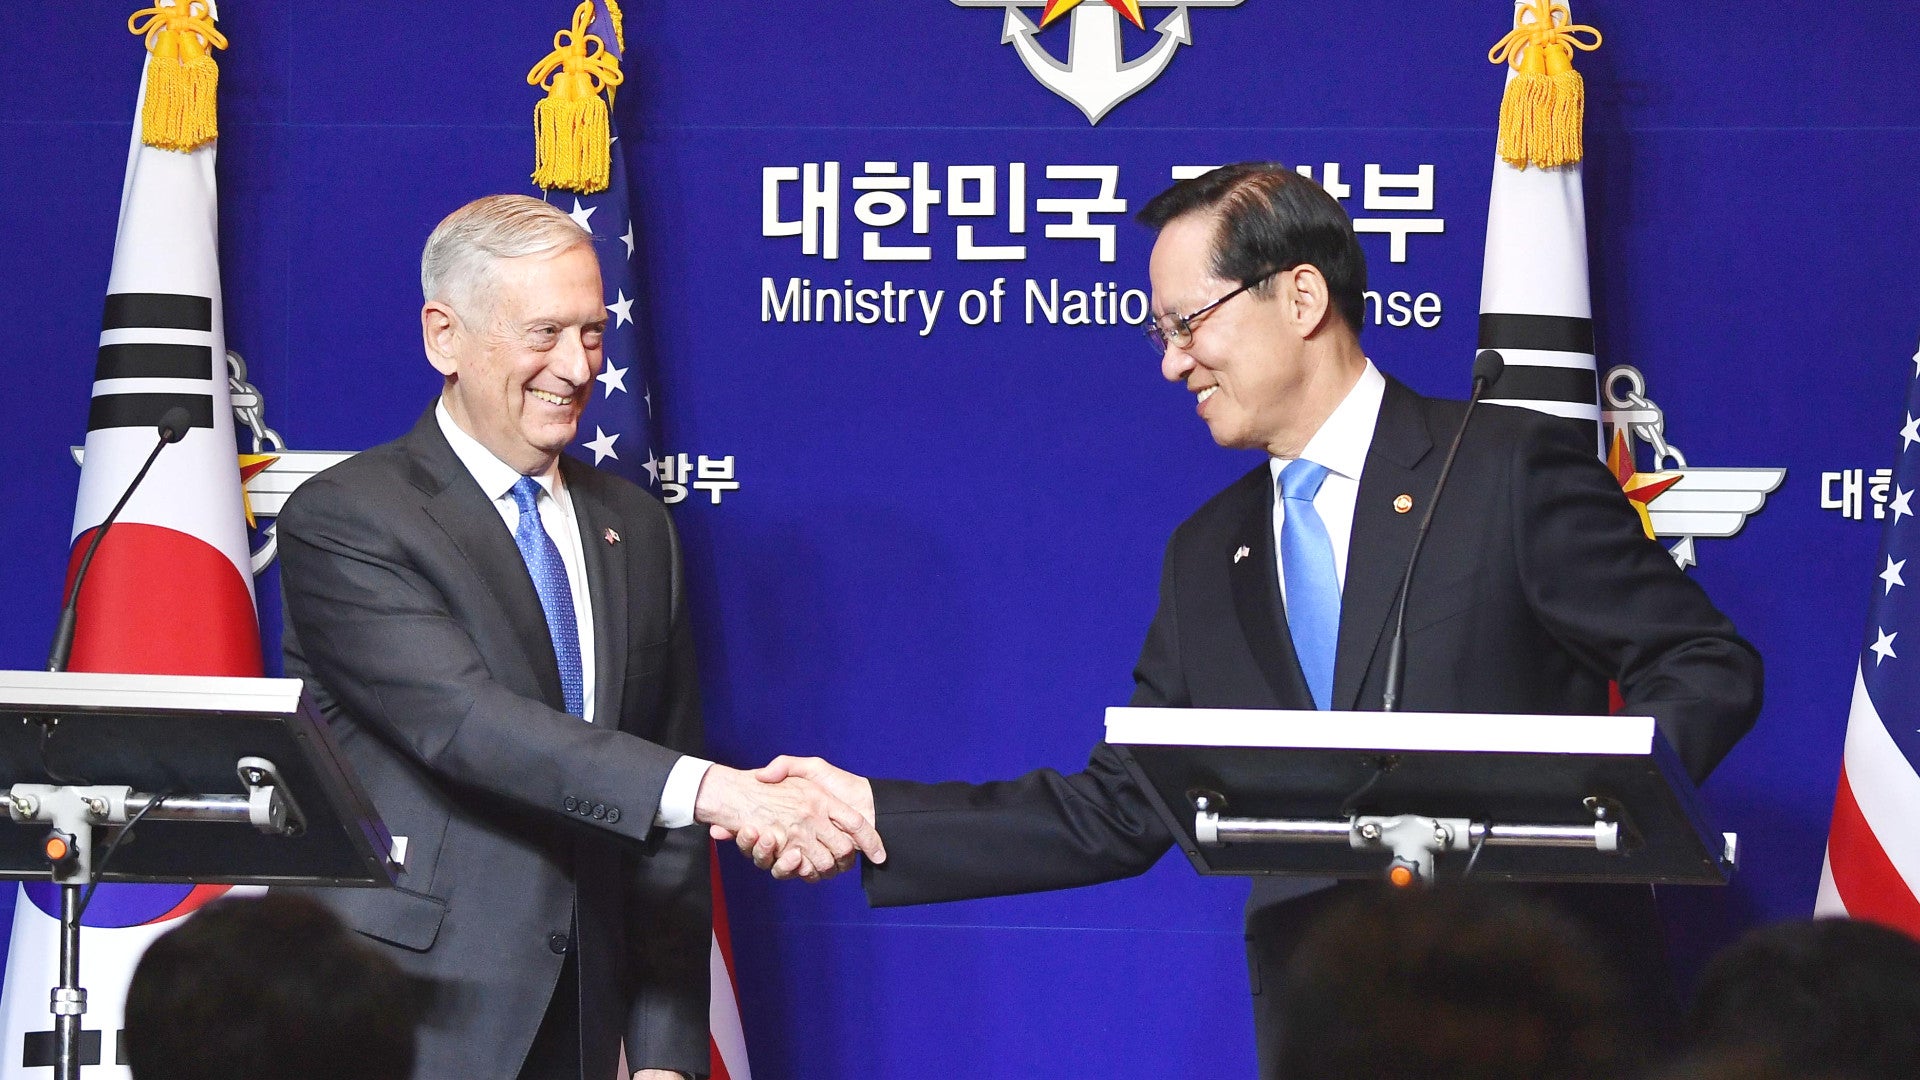 Here’s What You Should Know About Mattis and Dunford’s Trip to South Korea